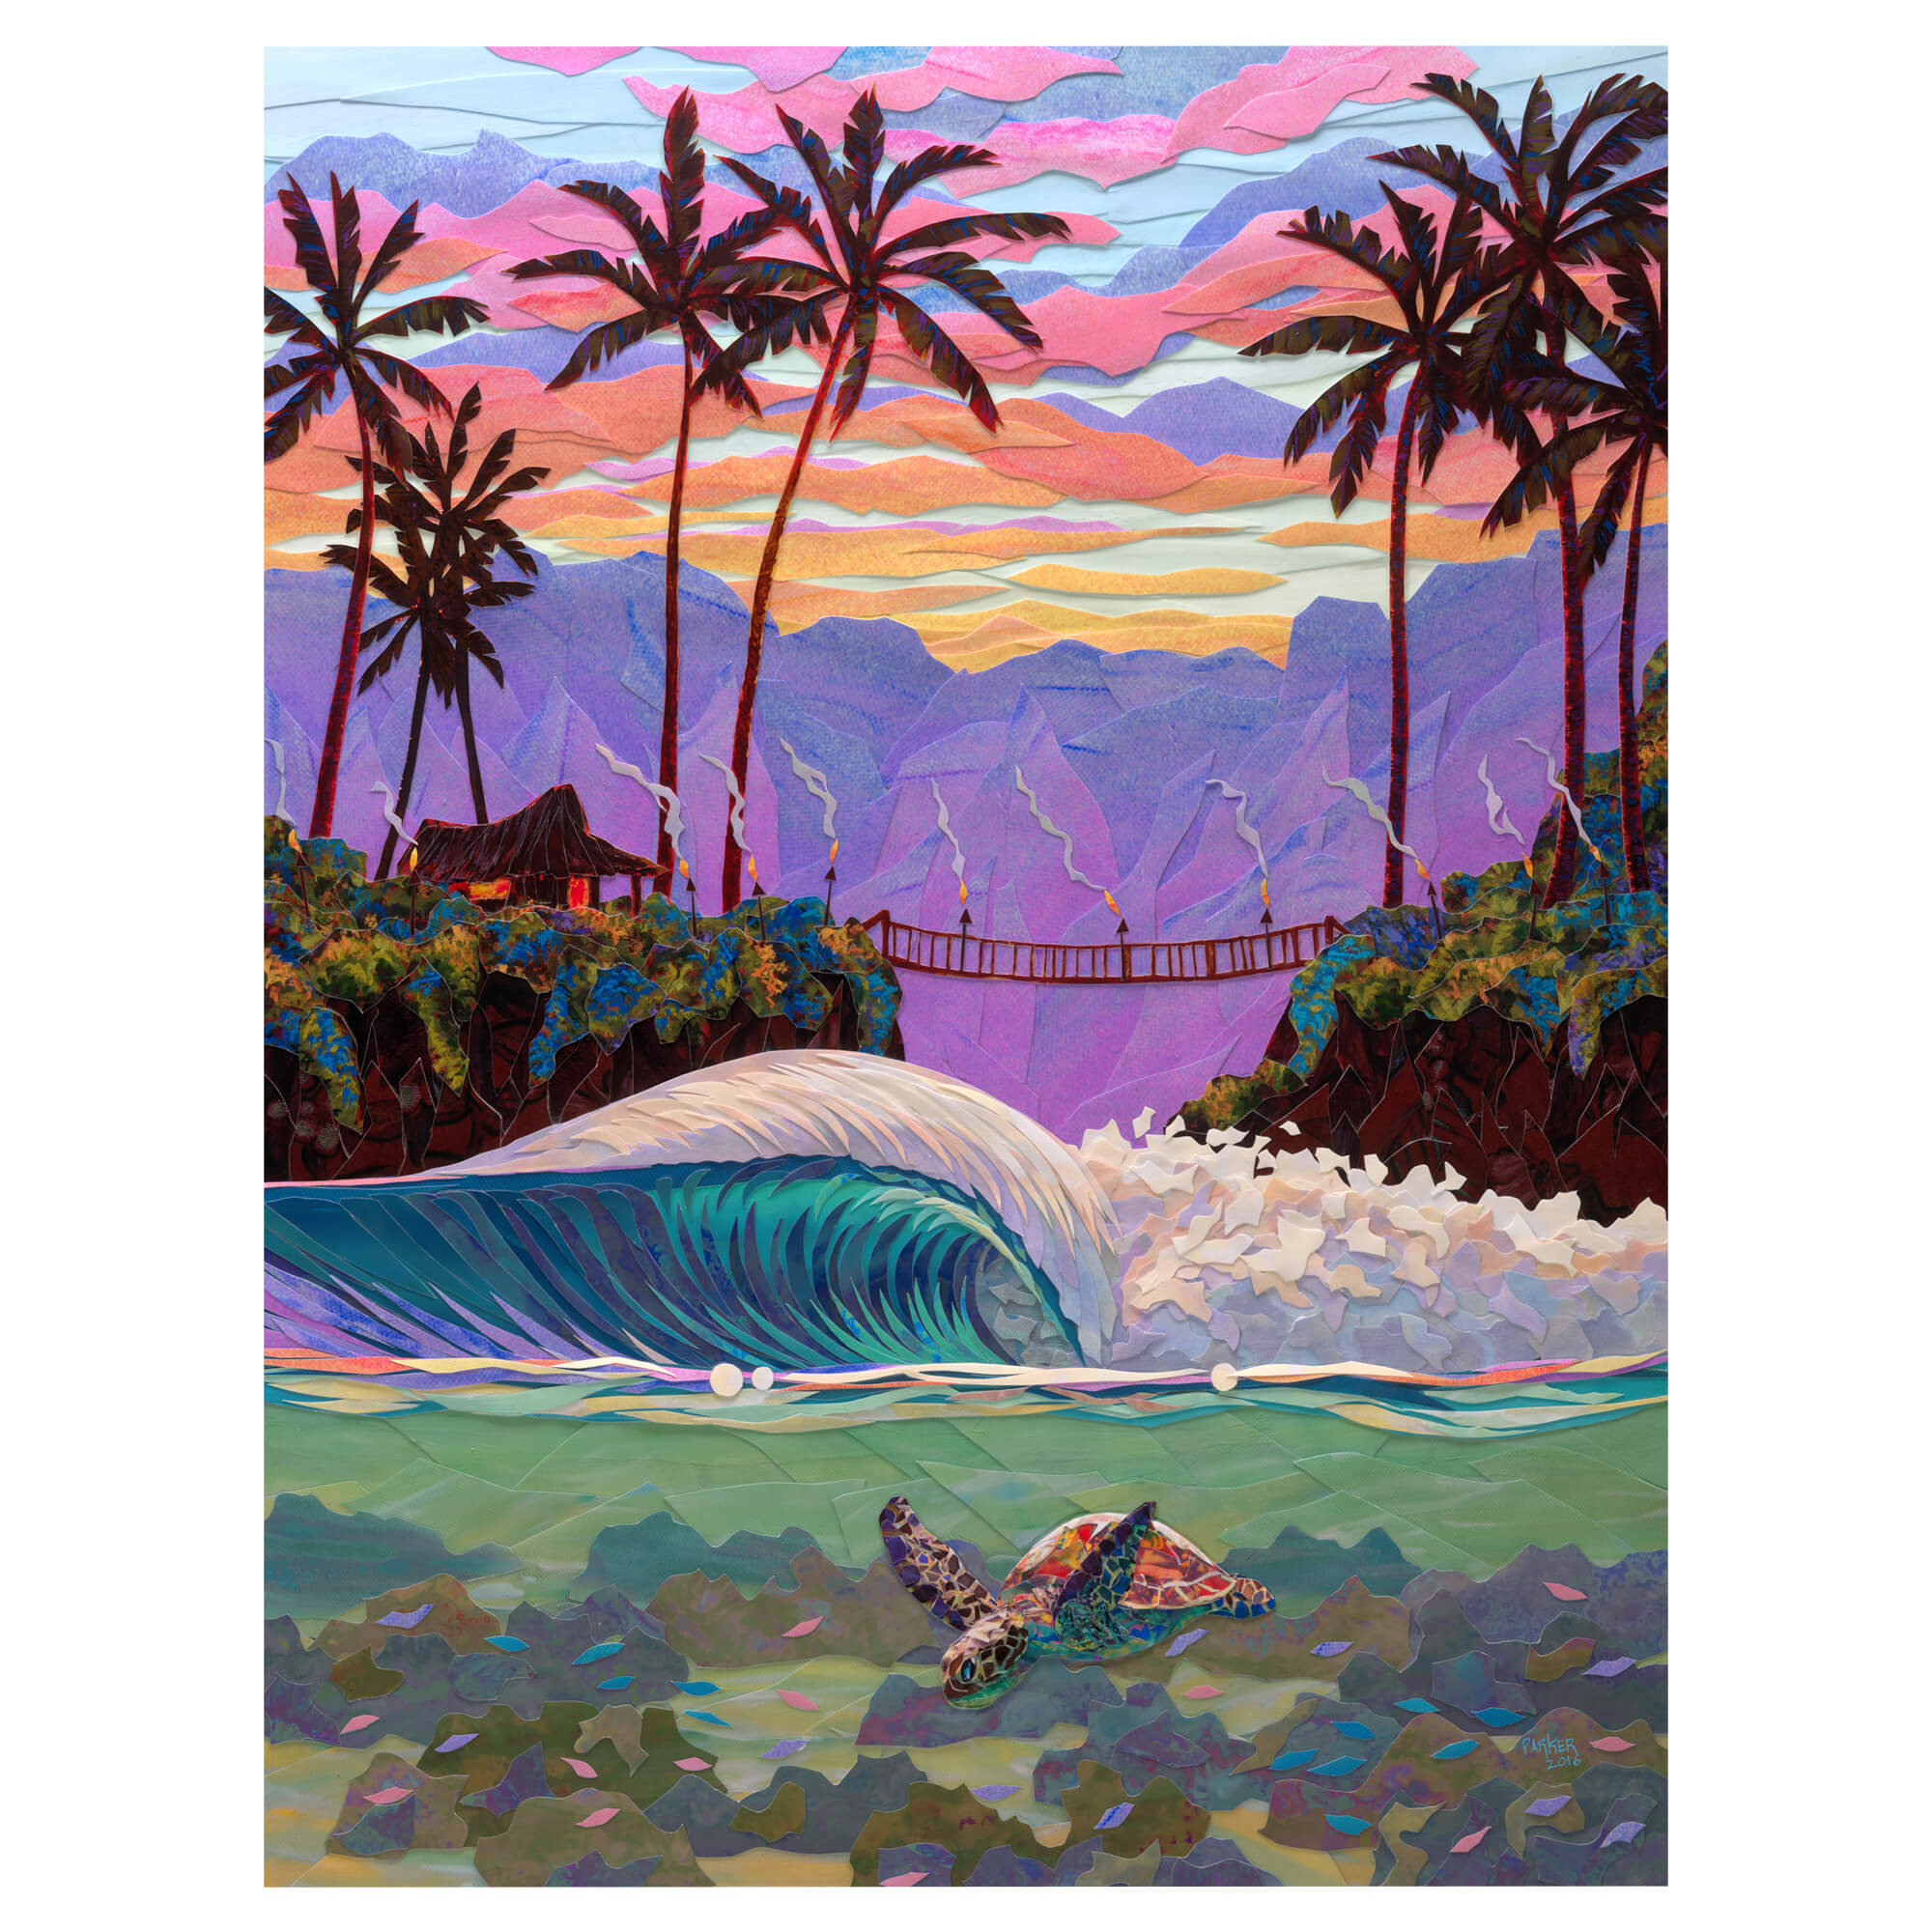 A matted art print featuring a collage of a beautiful seascape with a sea turtle swimming, a hut, and a gradient purple-pink-hued mountain background by Hawaii artist Patrick Parker